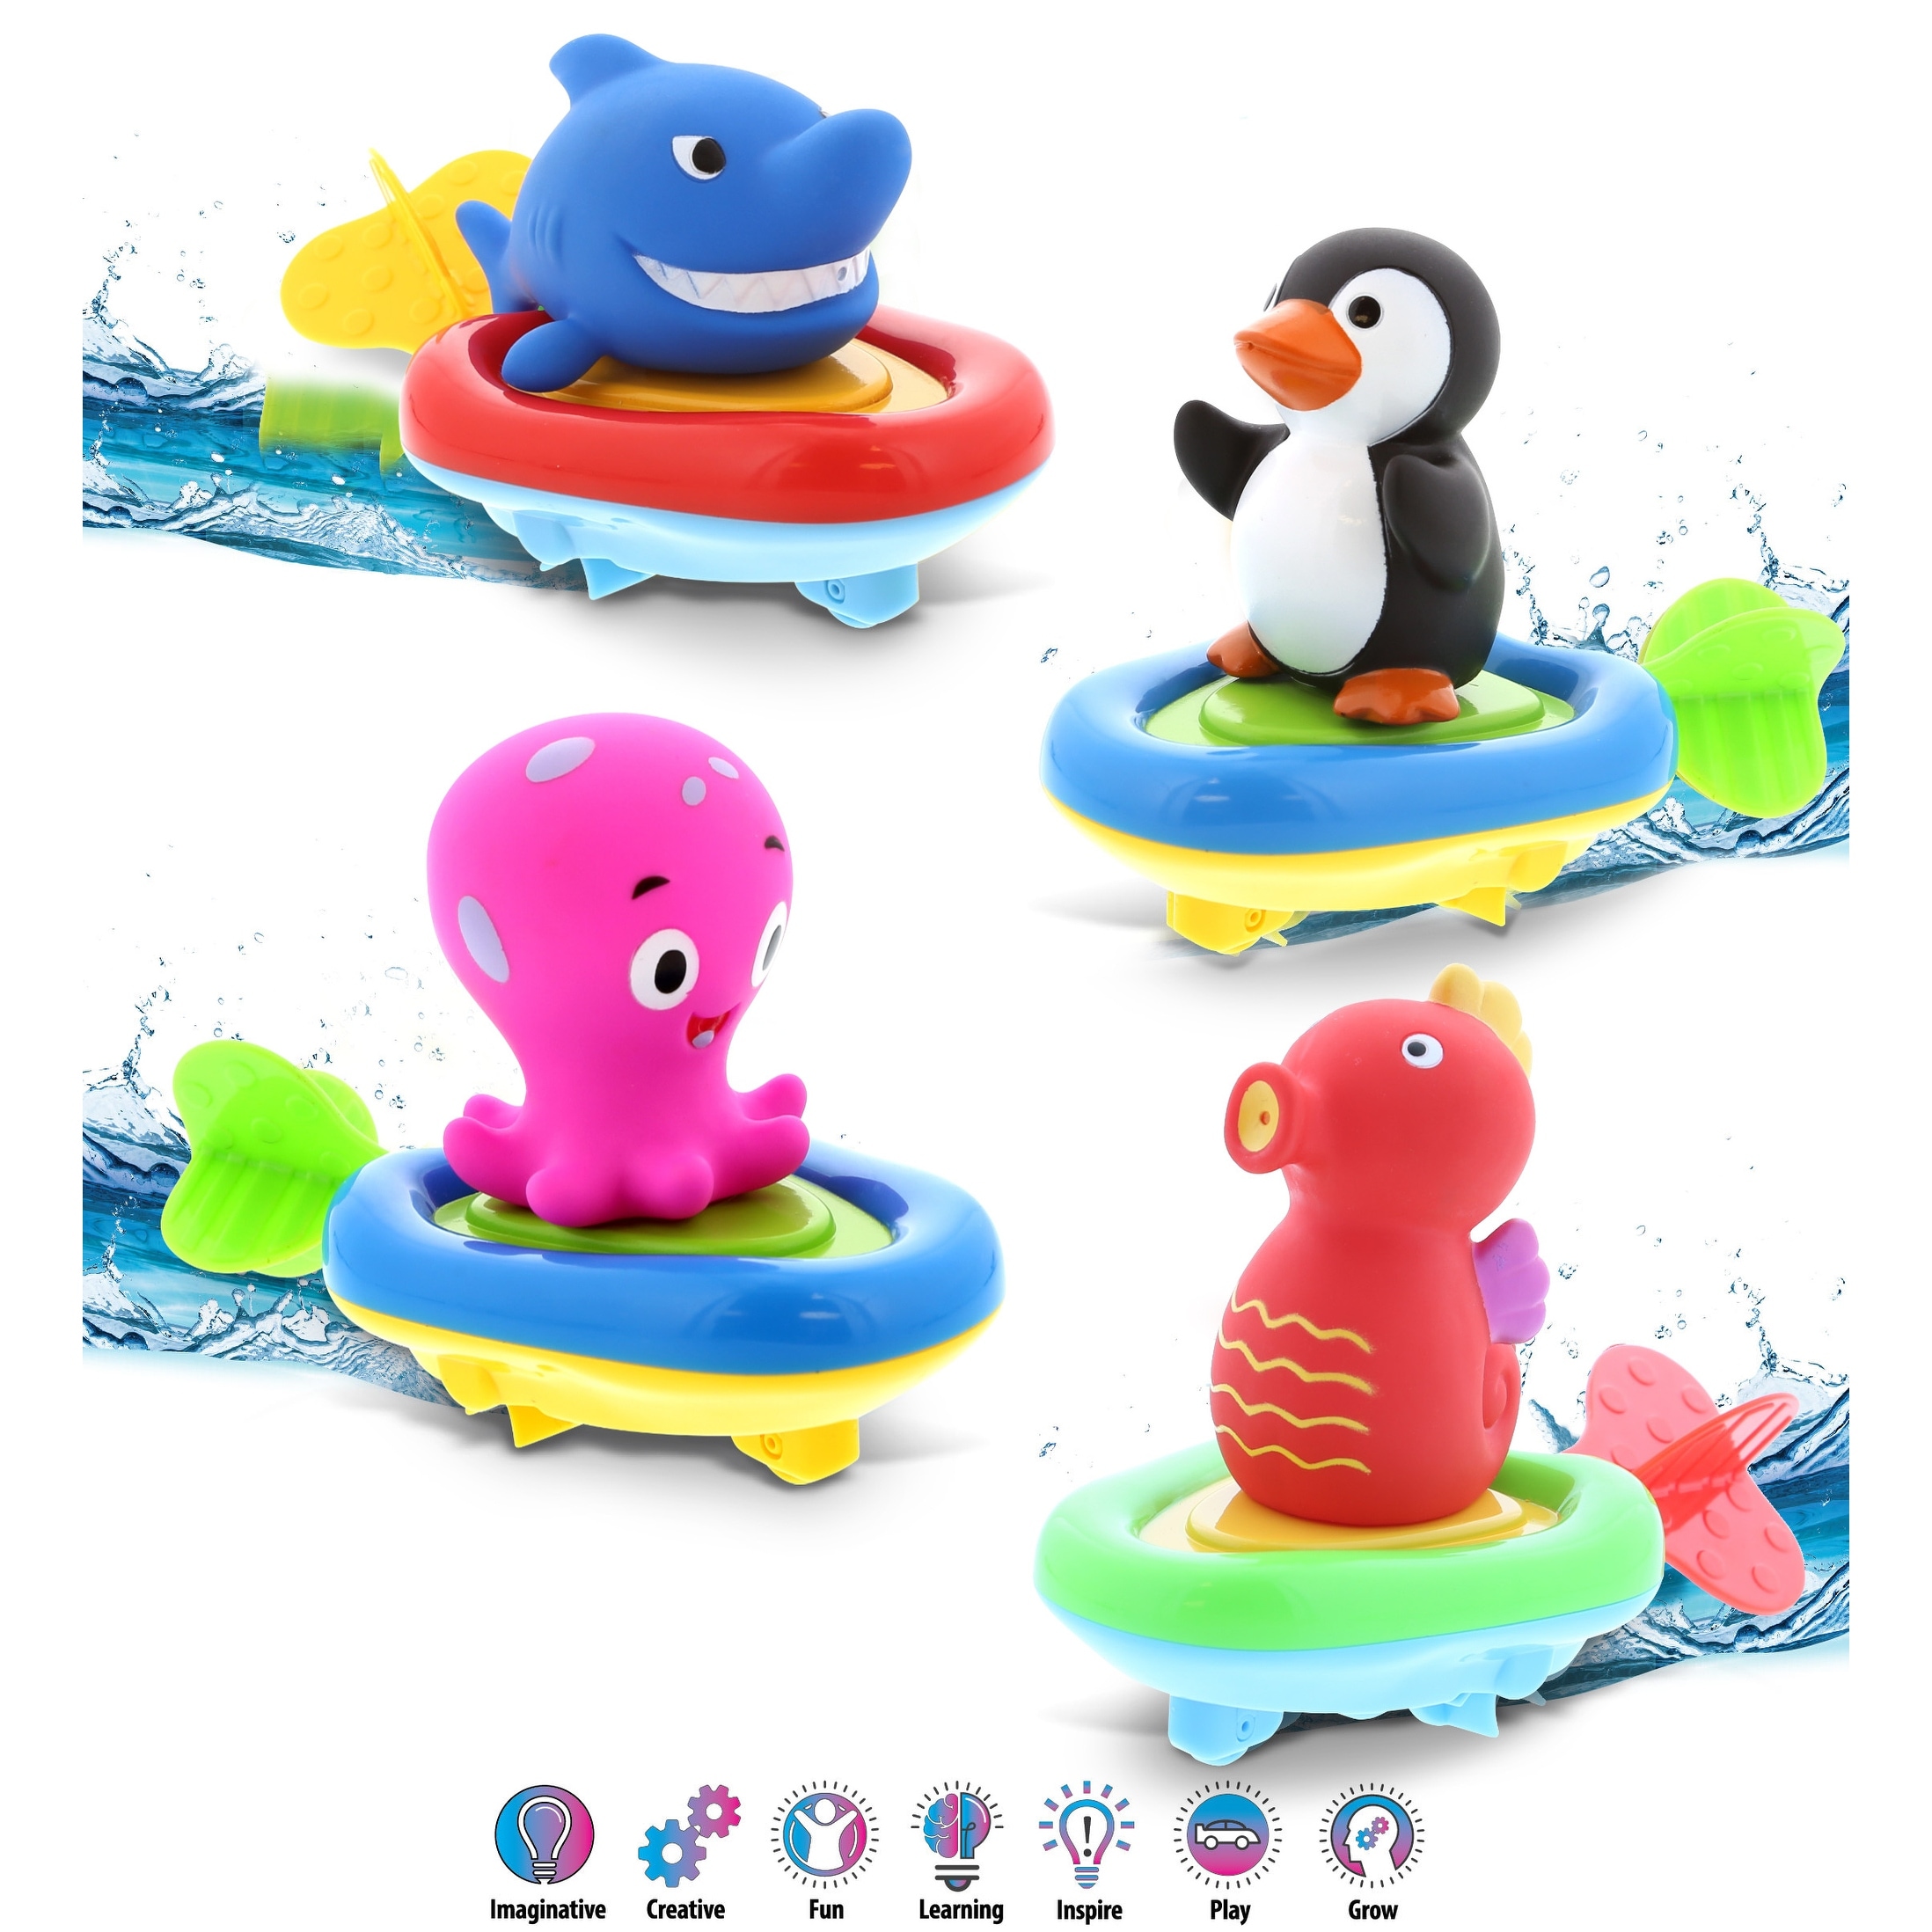 DolliBu Sea Life Boat Racers Bundle Set of 4 - 3-in-1 Bath Toy - Multicolor - 3x2.25x1.75 inches.